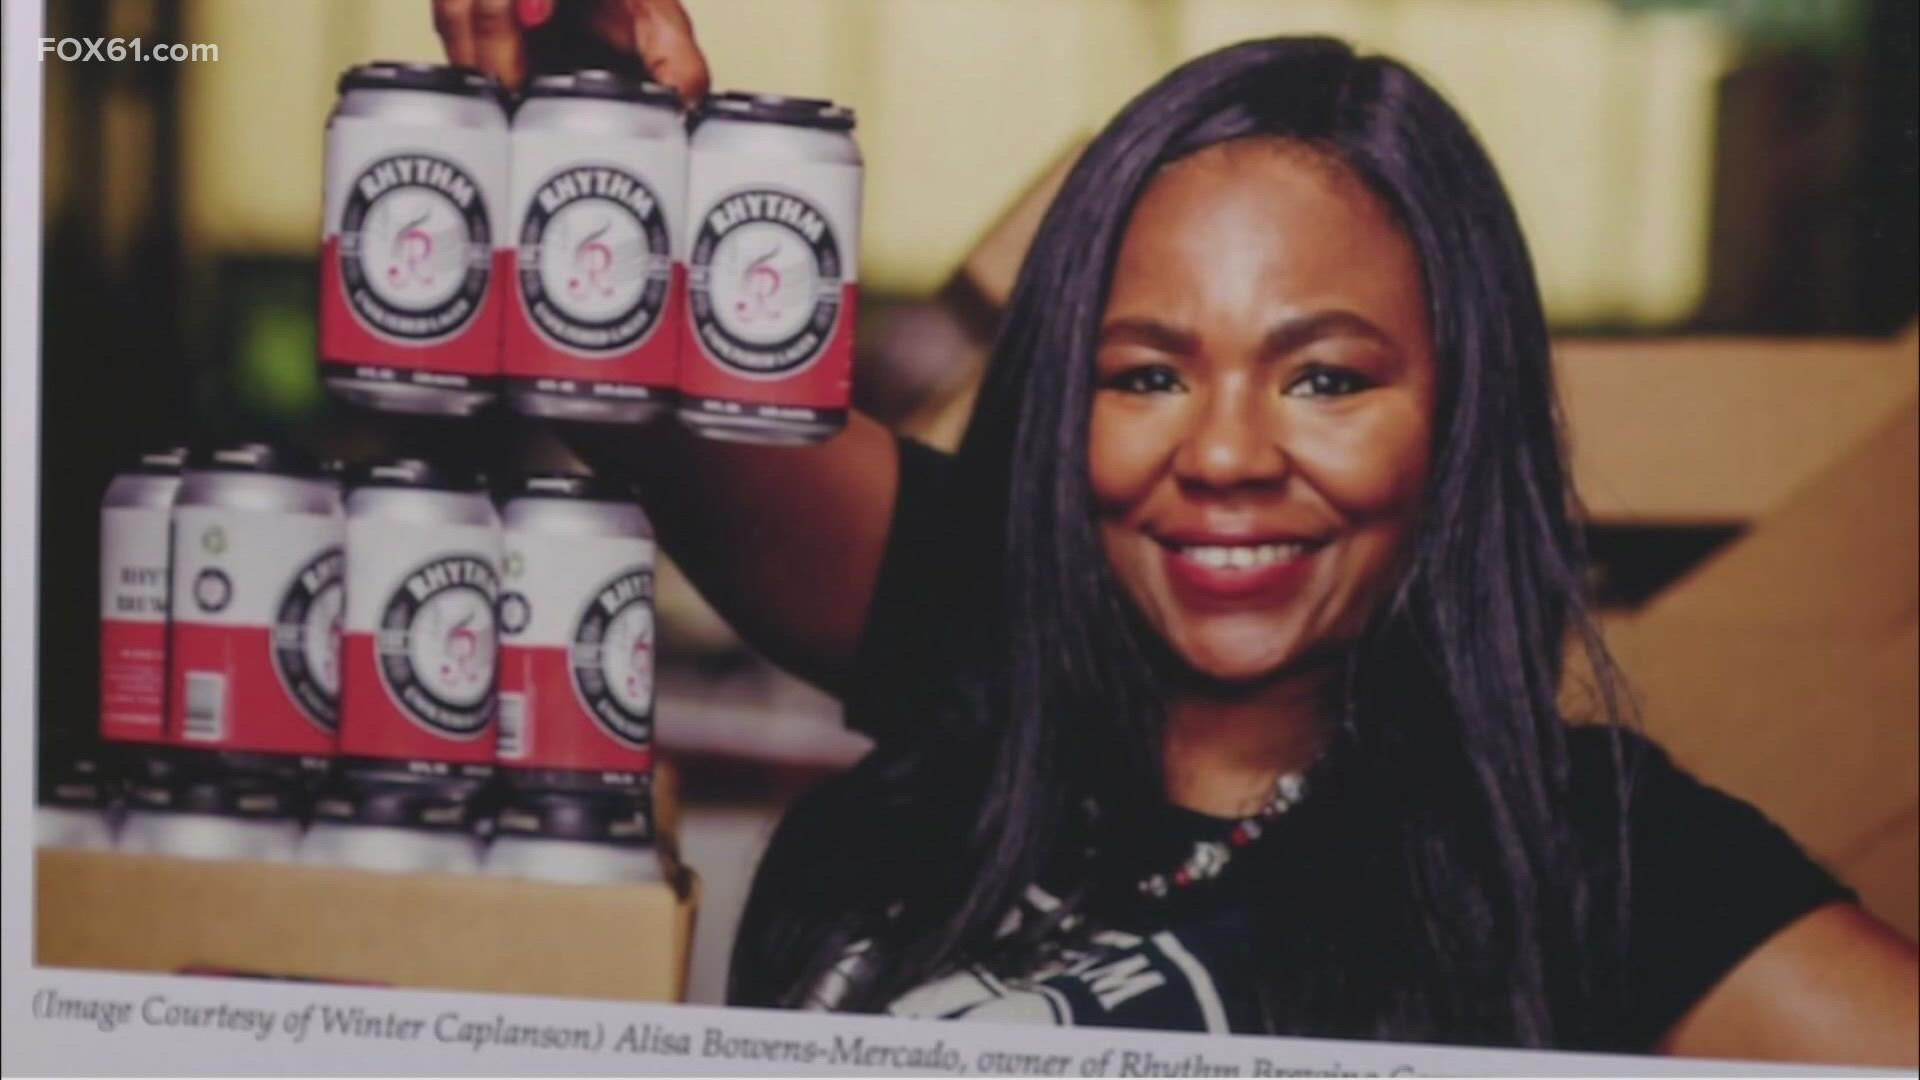 Owner and Brewmaster Alisa Bowens-Mercado says her hope is to leave a legacy that changes the world and the beer industry, one sip at a time.